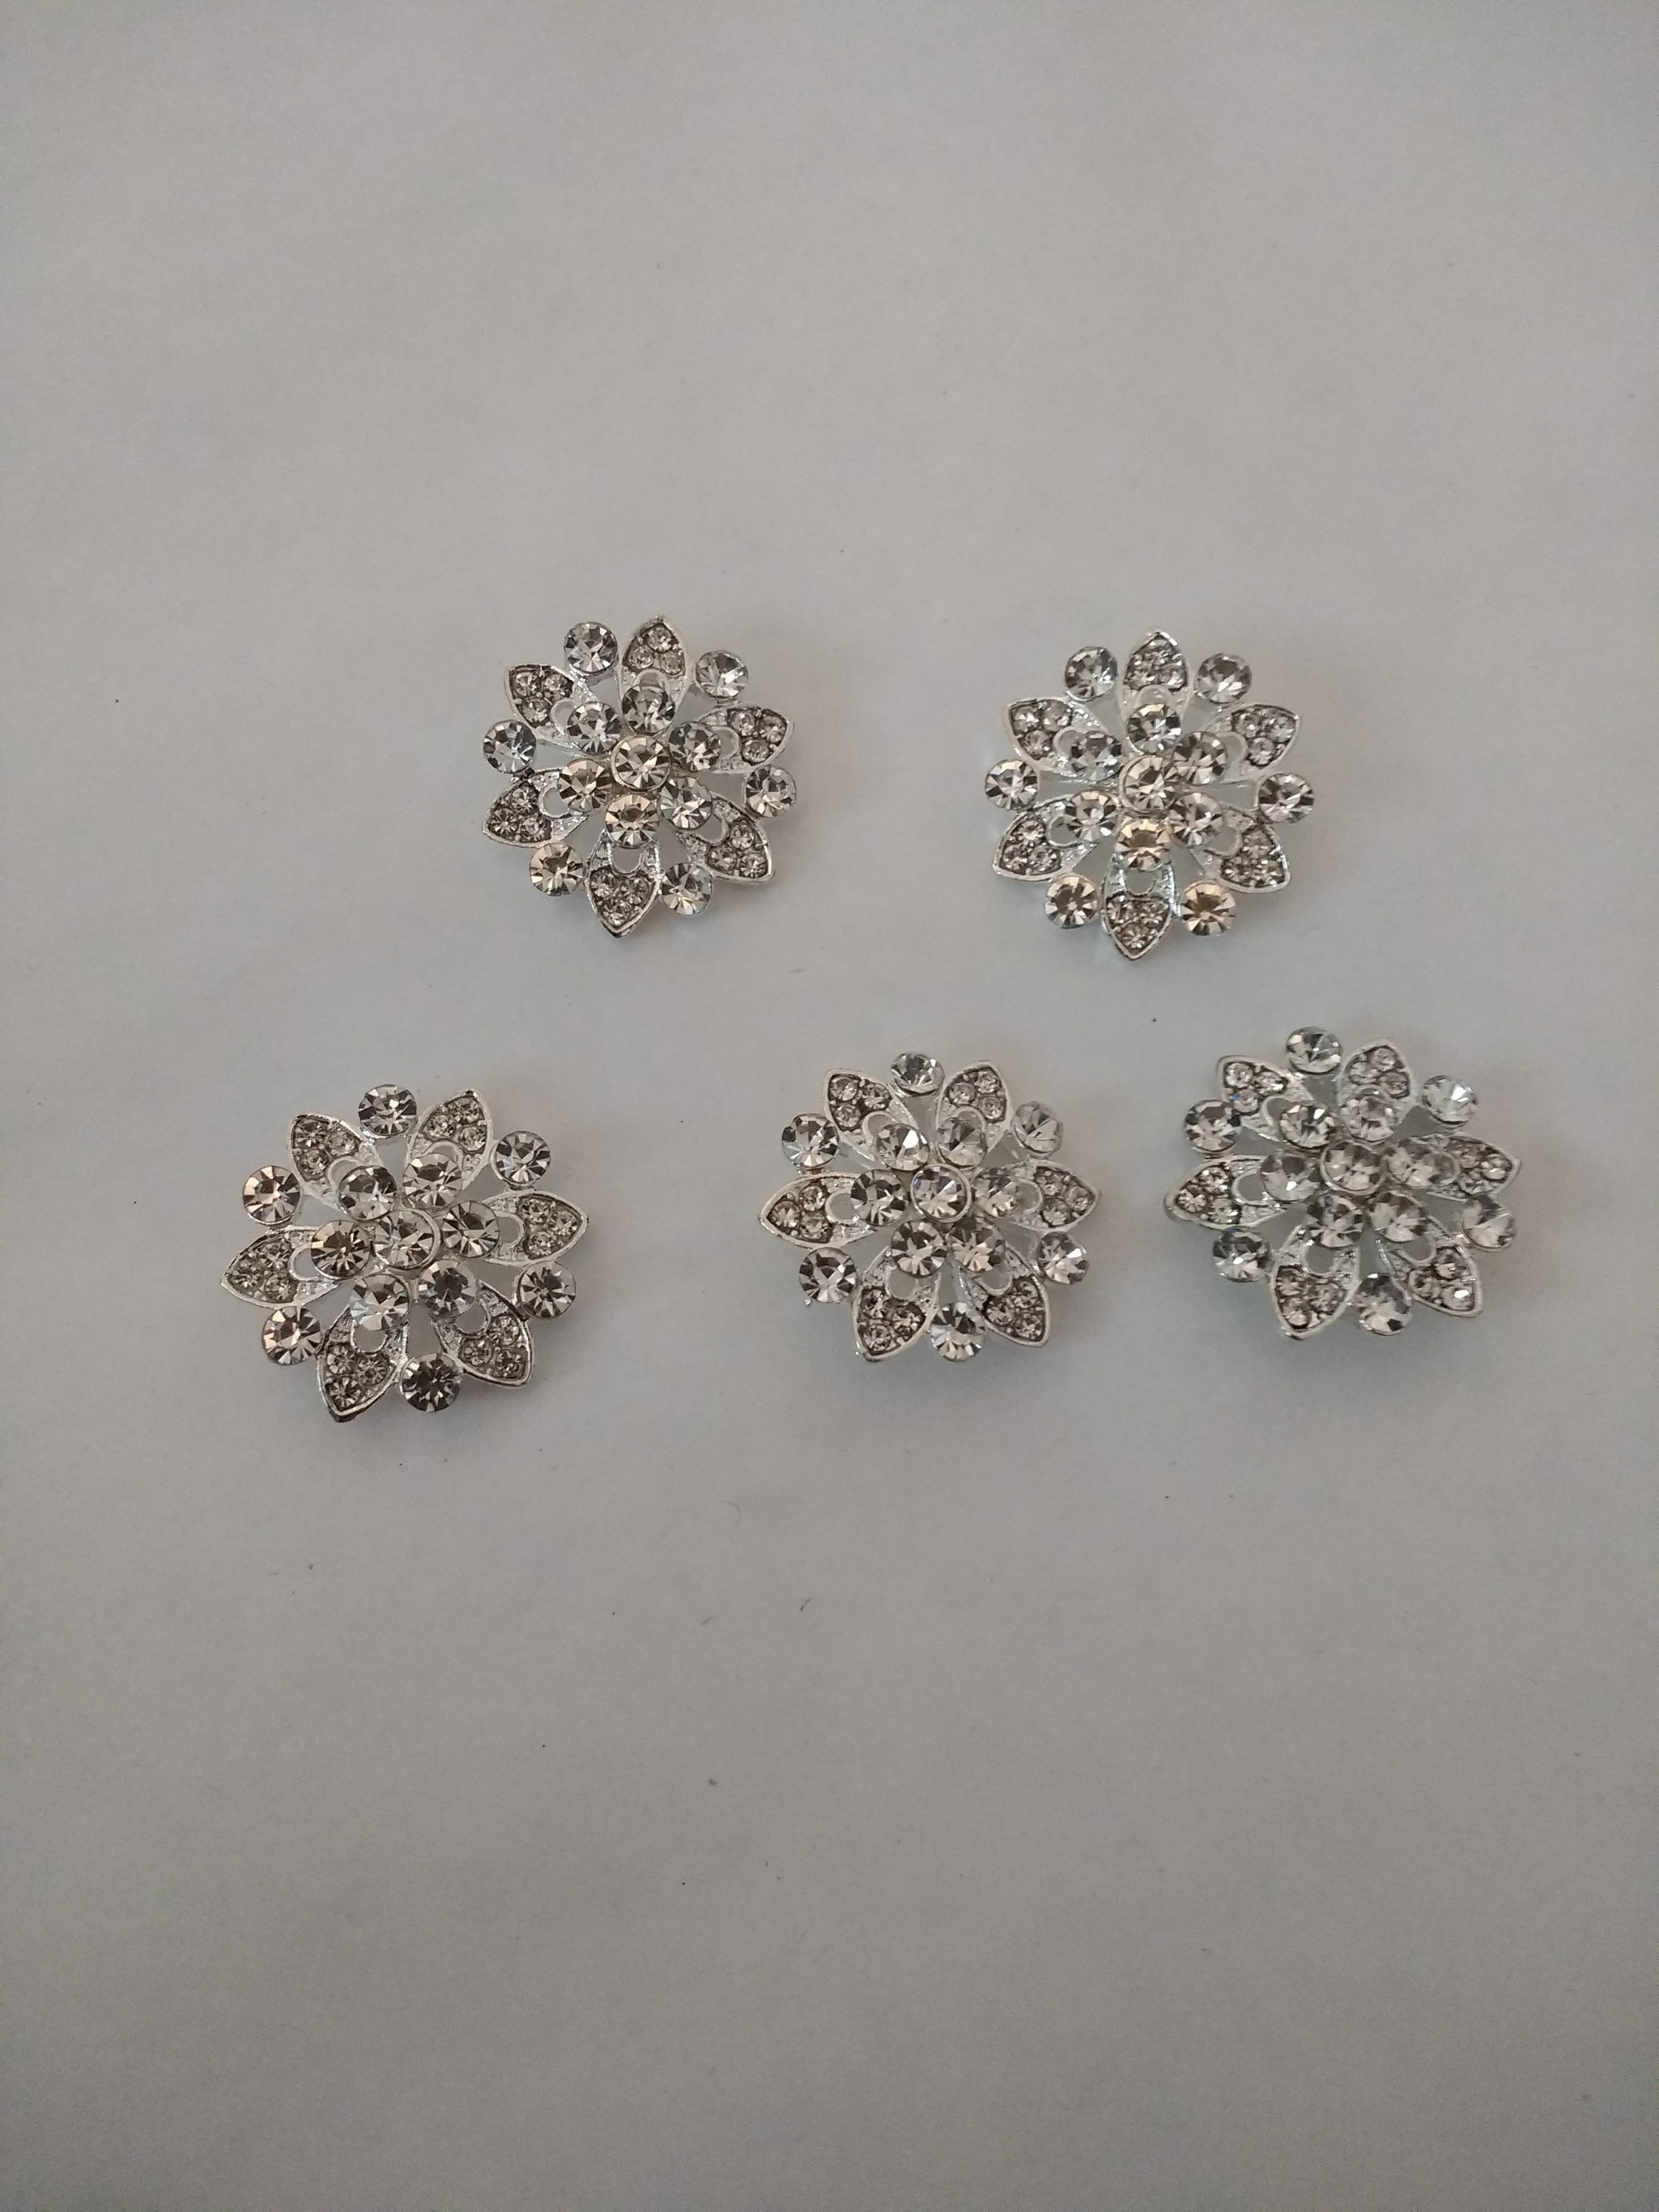 10 Pcs,crystal Buttons,round Buttons,rhinestone Buttons,buttons W